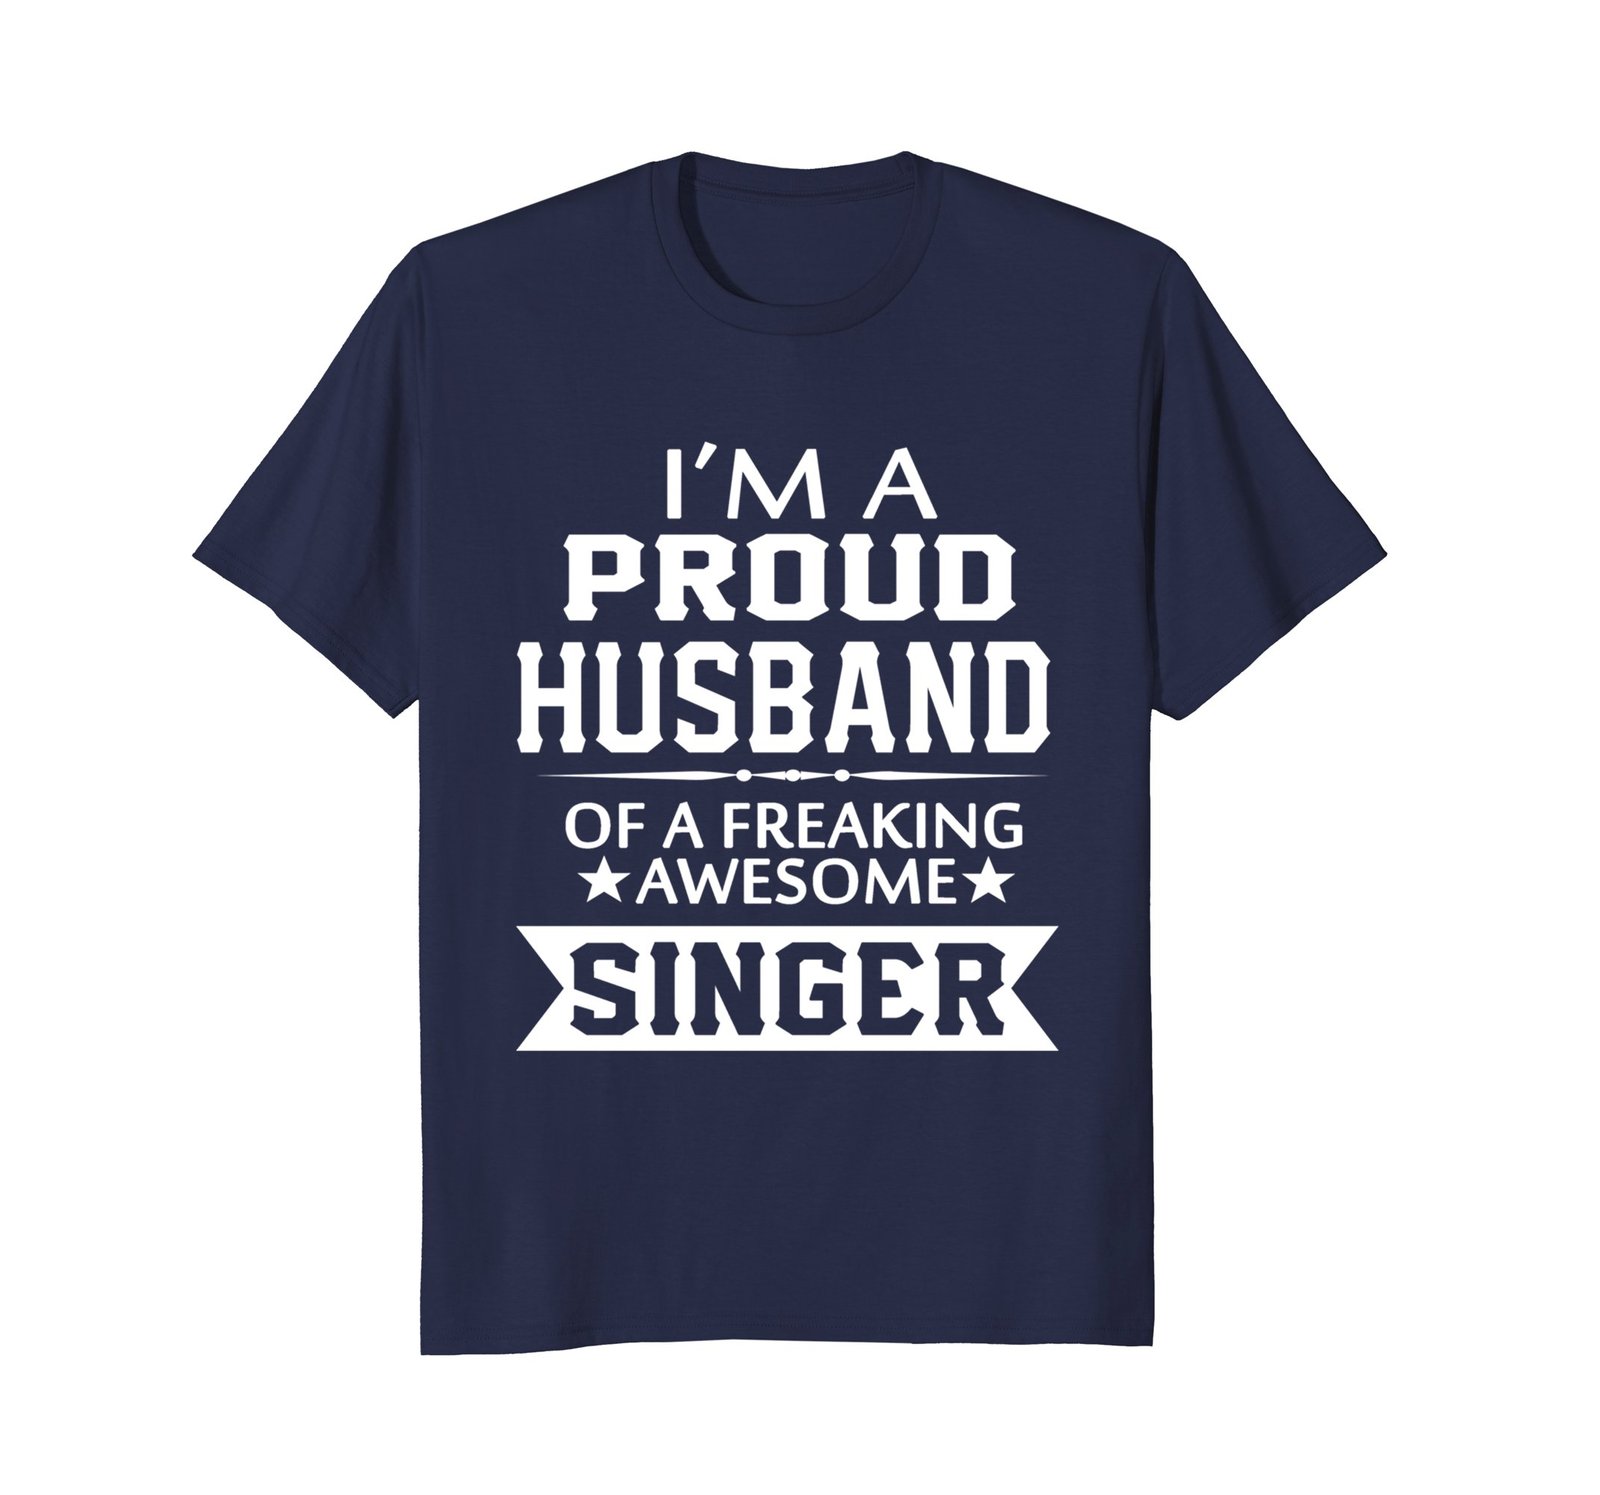 Funny Shirts - I'm A Proud Husband Of A Freaking Awesome Singer T-Shirt Men